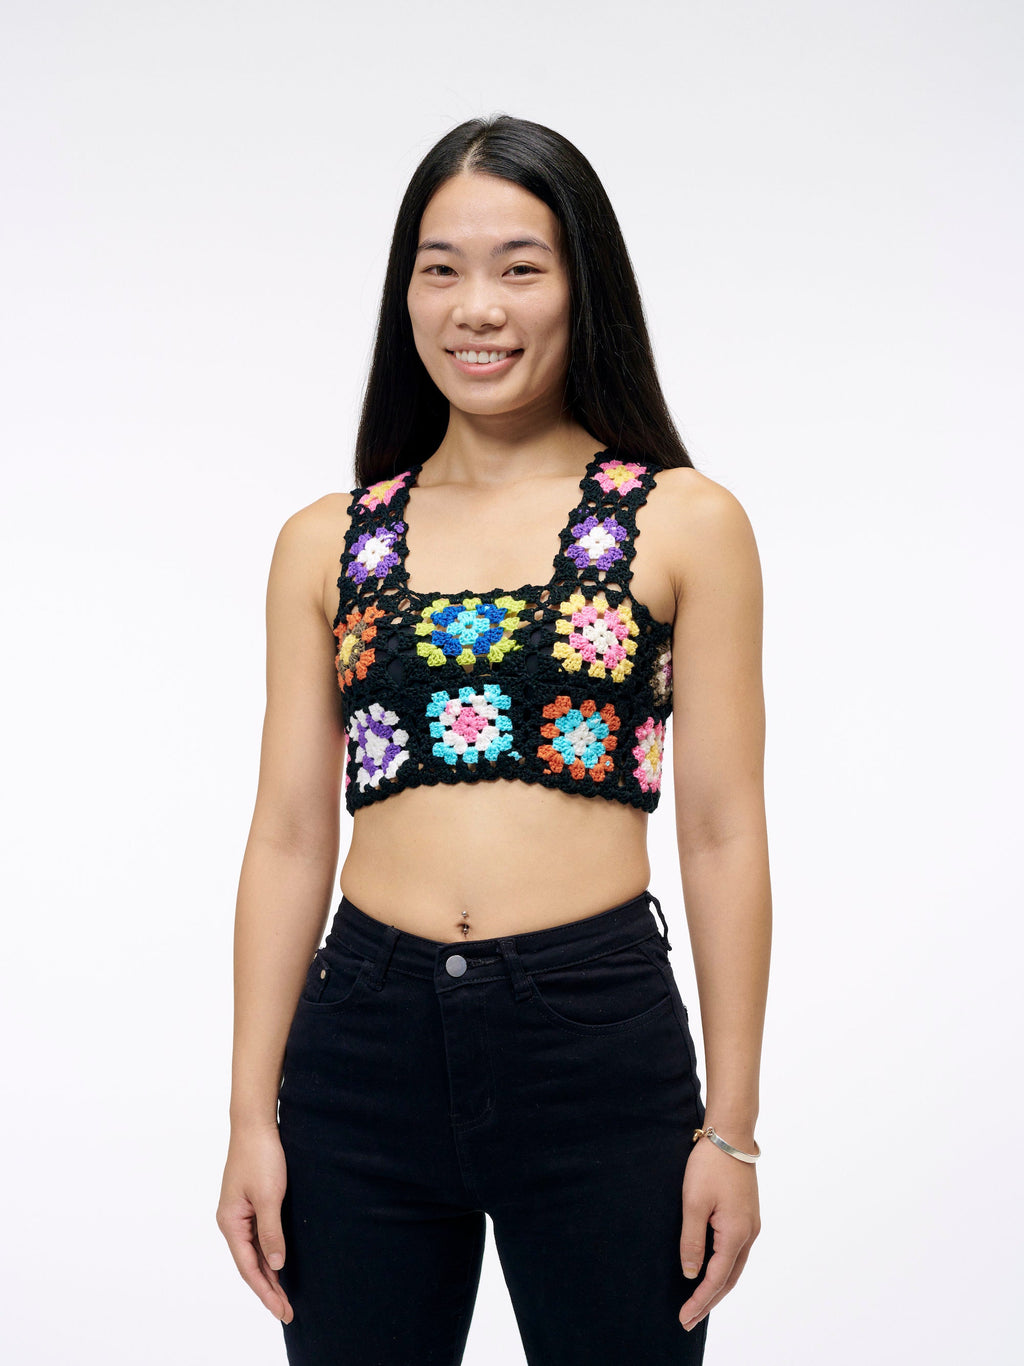 The Flower Square Crochet Top | A Handmade Piece for the Vintage Inspired Lover | Crochet in Black and Rainbow Granny Squares | Goose Taffy